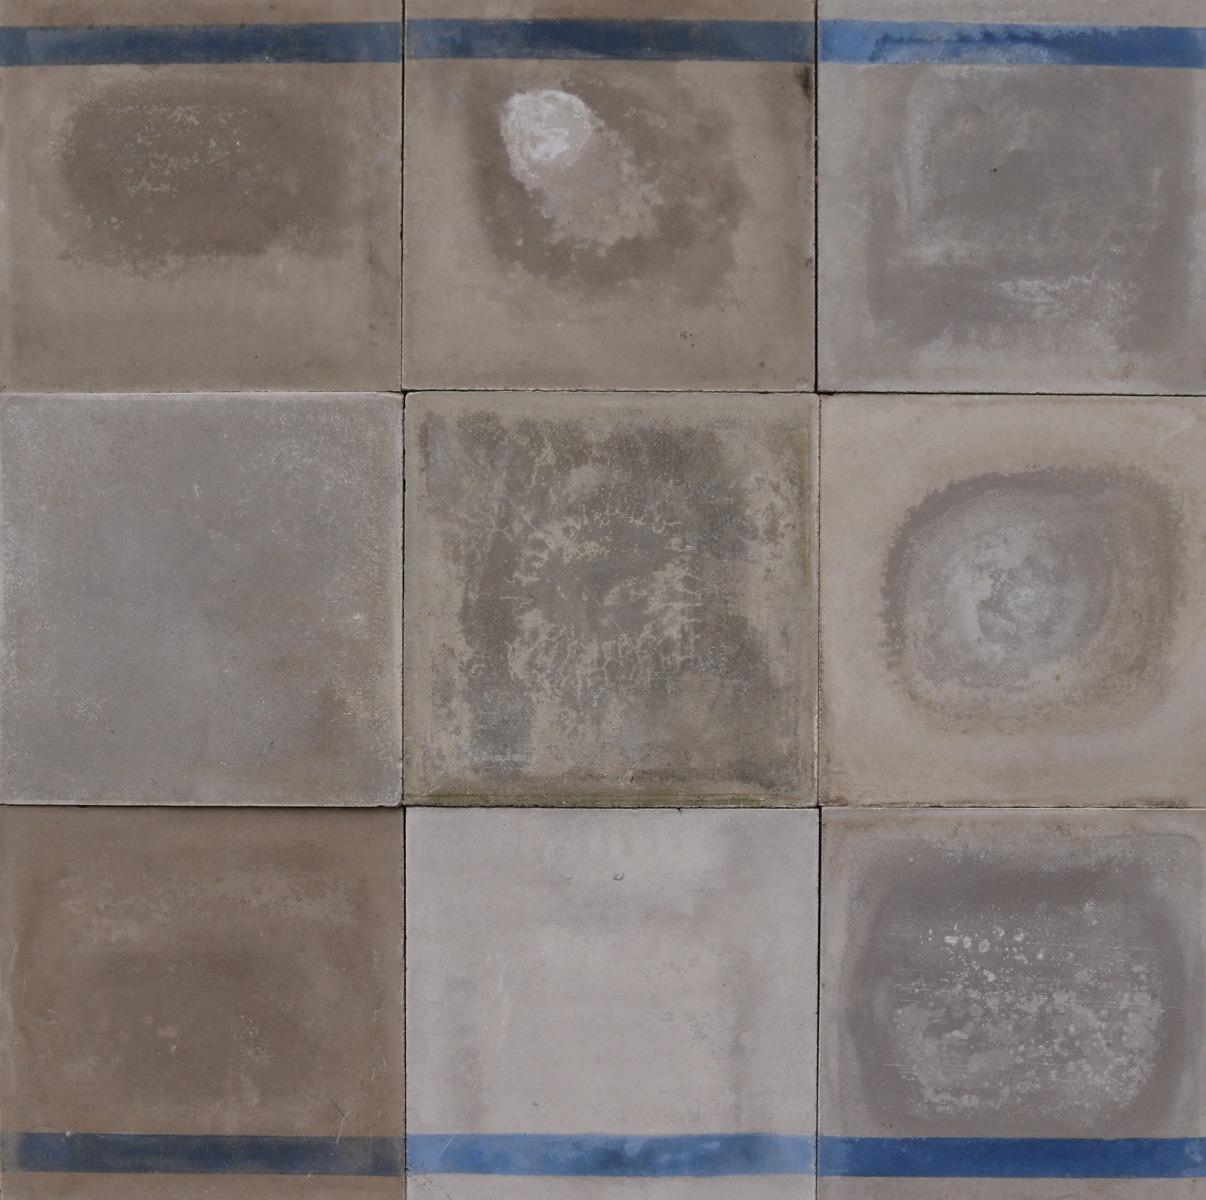 A batch of 128 reclaimed cement floor or wall tiles. These tiles will cover 4 m2 or 43 ft2.

This item consists of:

69 blue line tiles.

35 grey tiles.

Reclaimed tiles in good overall condition. Small chips, losses and surface wear